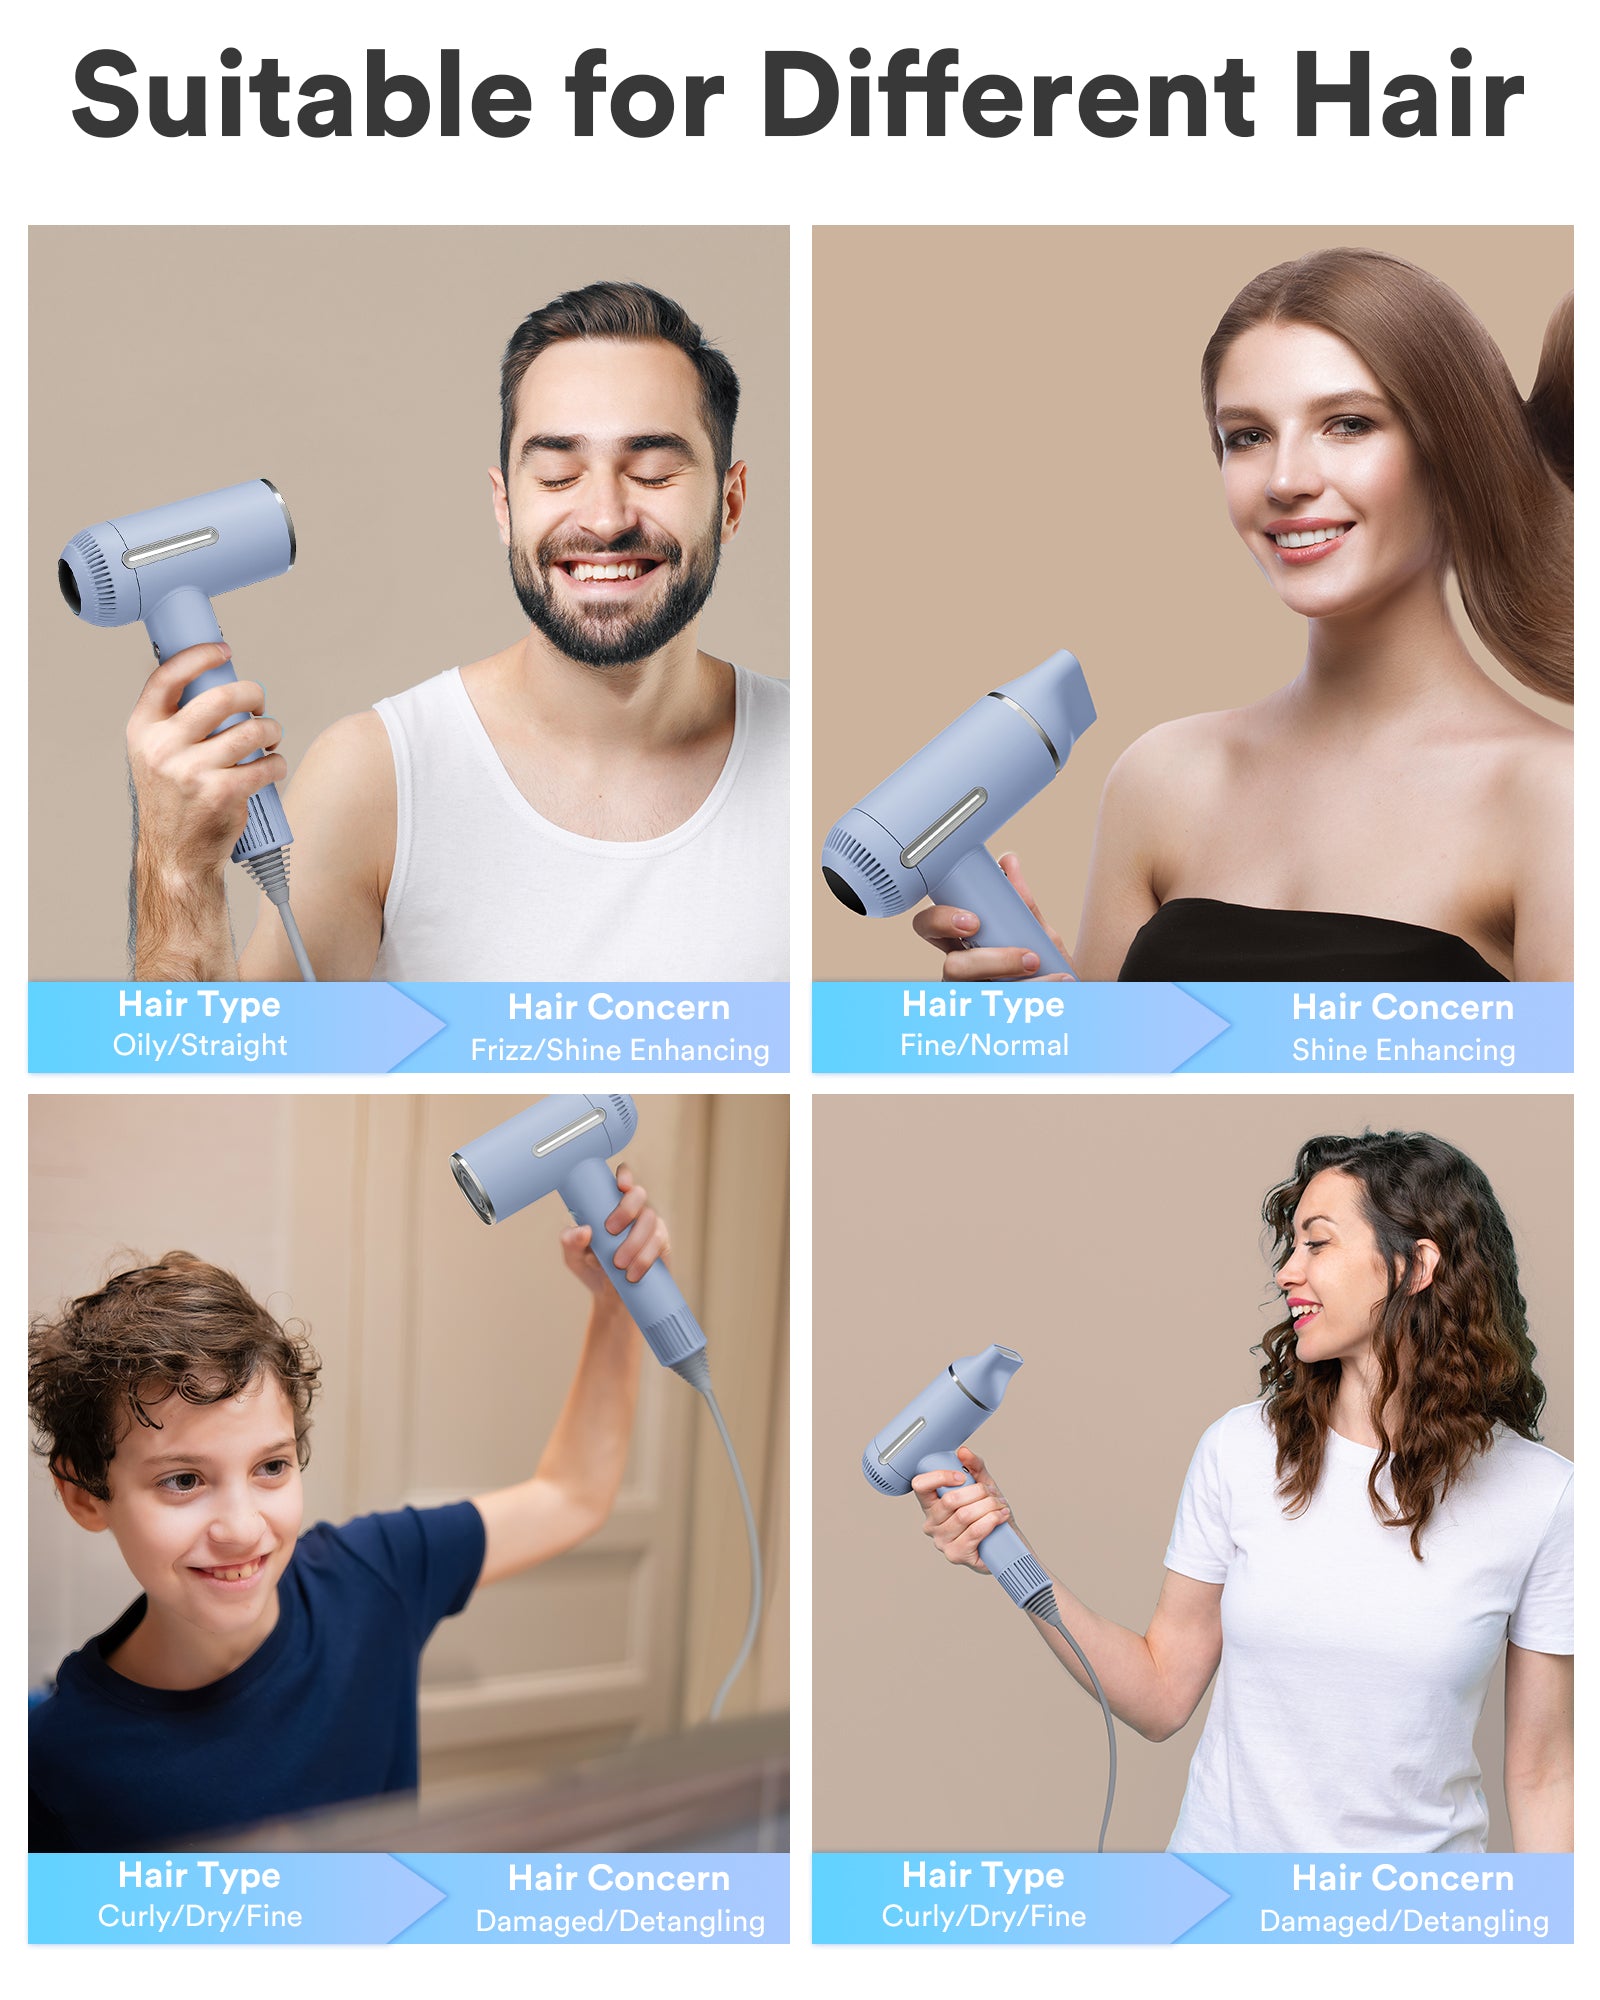 Tensky SKY-S200 Negative Ionic Hair Dryer(Use Code: S200 to get $80 off)